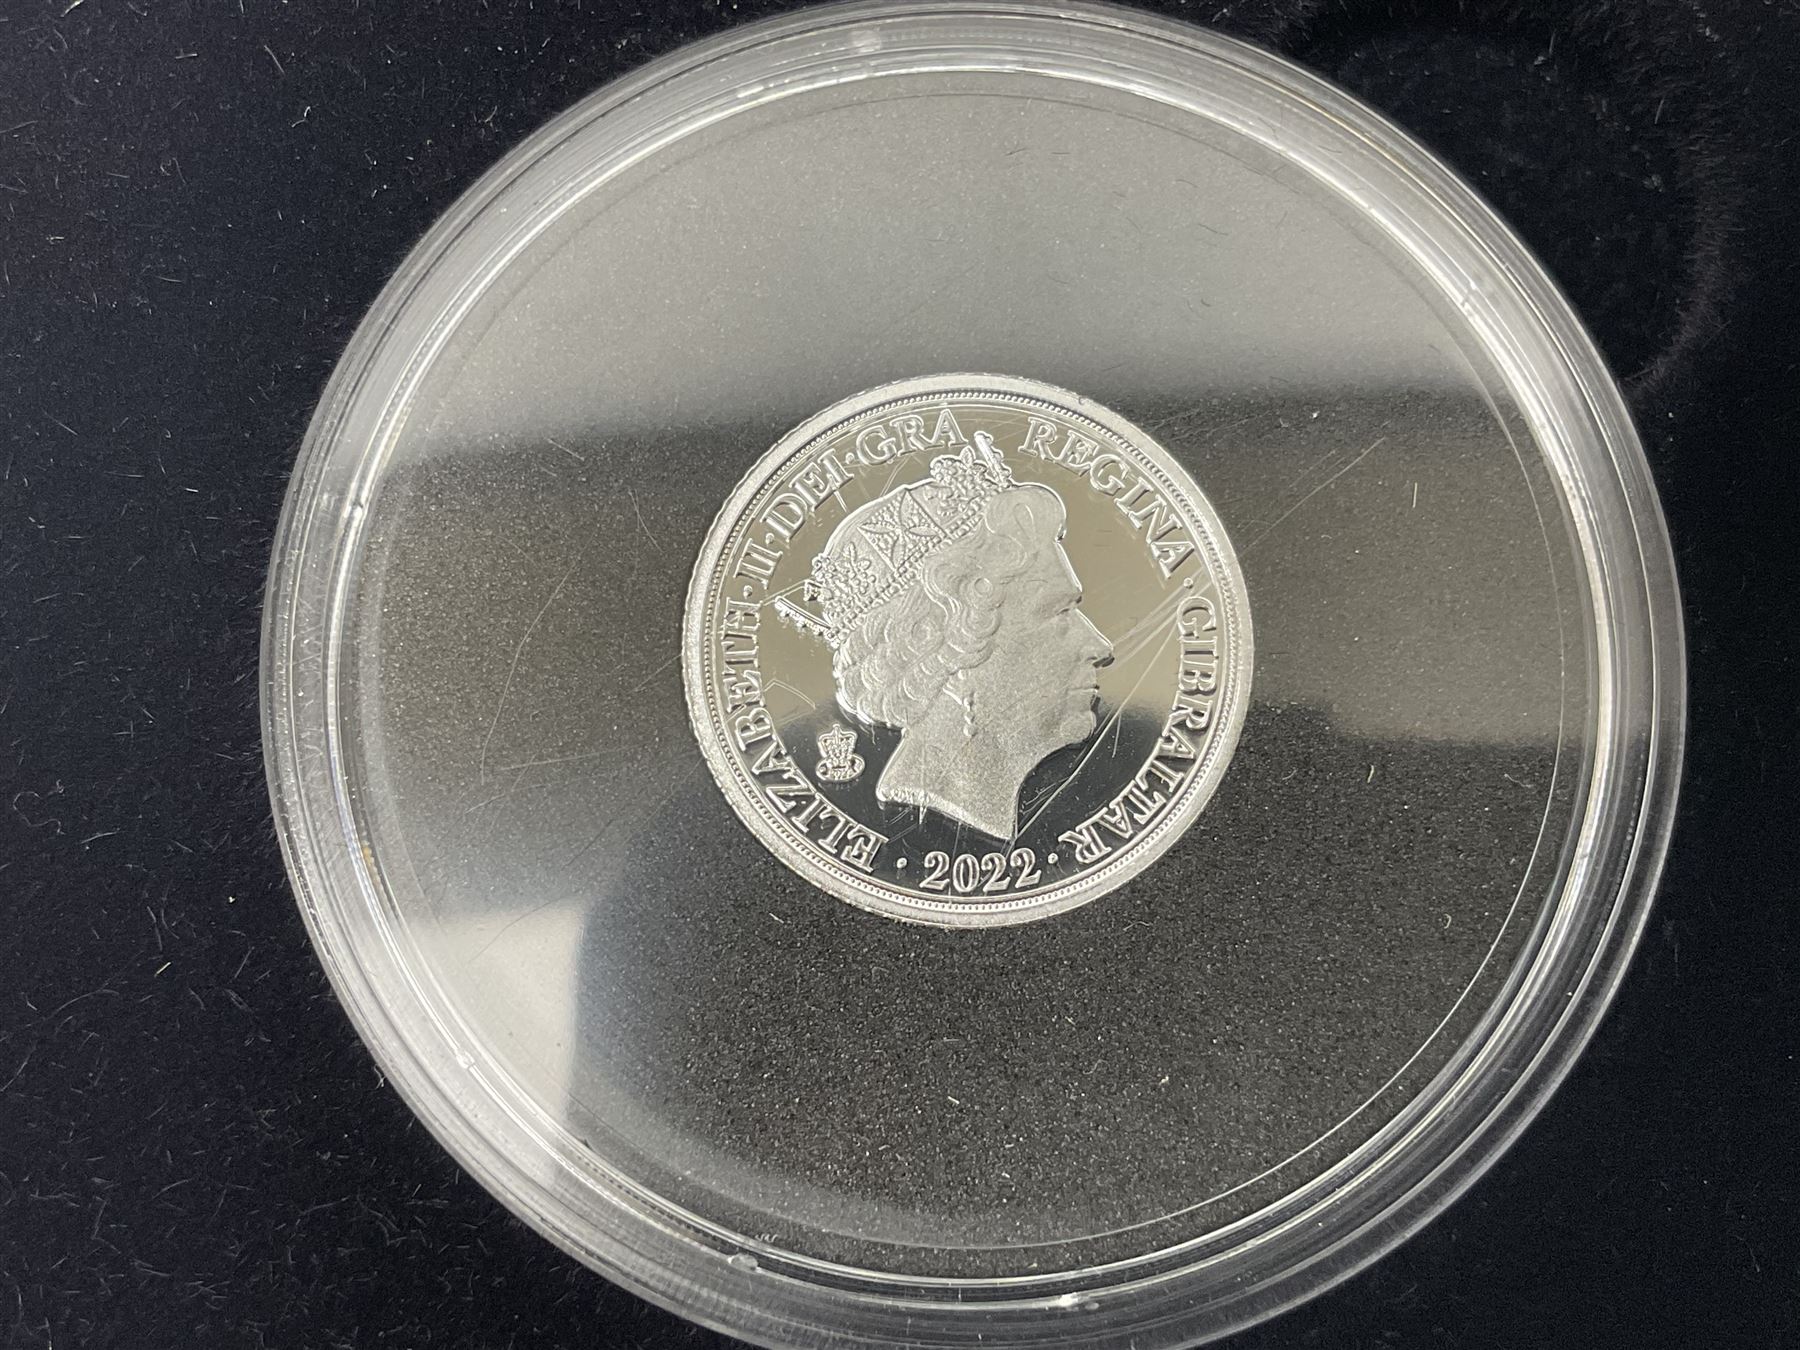 Queen Elizabeth II Gibraltar 2002 five coin silver-proof collection - Image 3 of 13